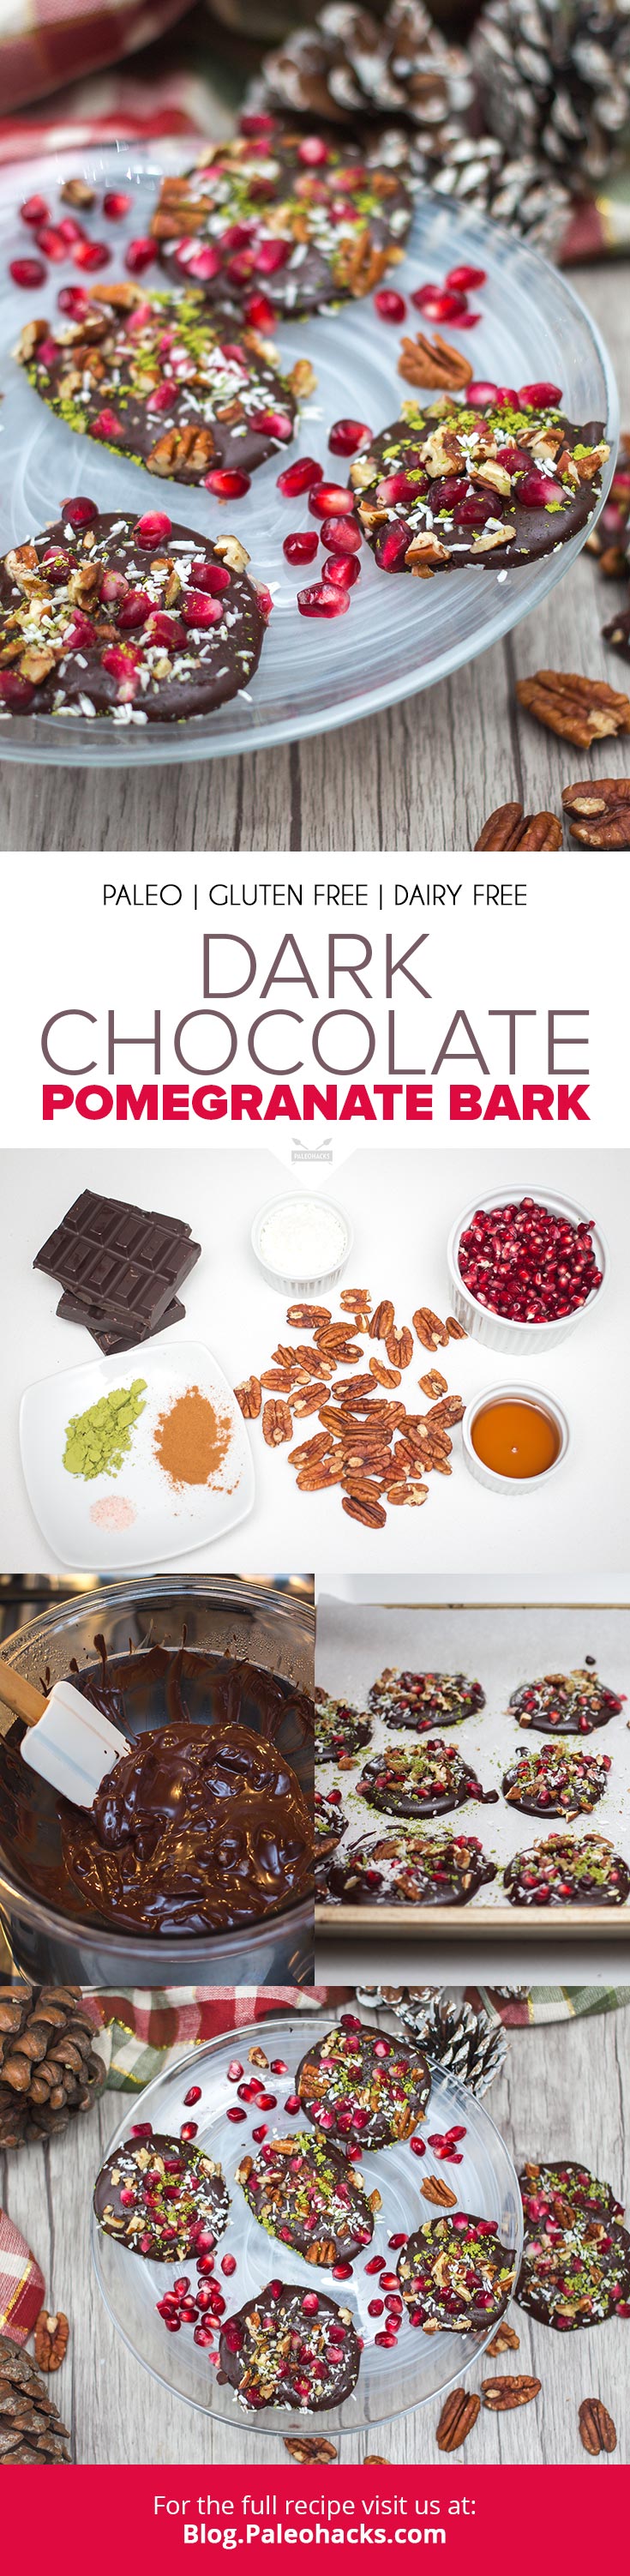 Delight your guests with a chocolate bark topped with pomegranates, pecans, and matcha. Serve it as a fun treat for the holidays or enjoy year-round as a tasty snack!